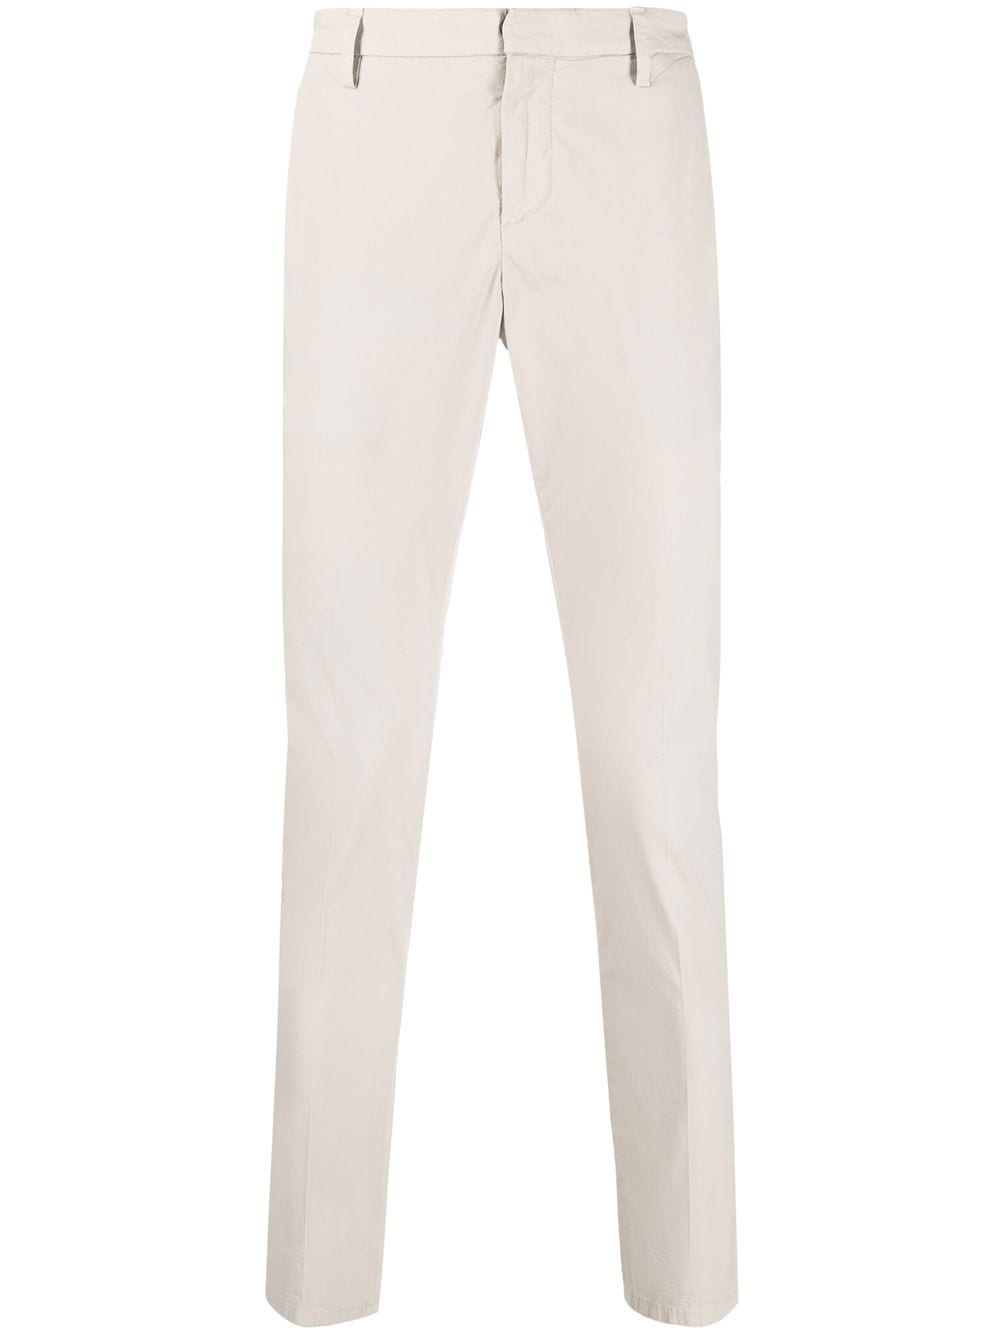 Image 1 of DONDUP pressed-crease cotton chinos